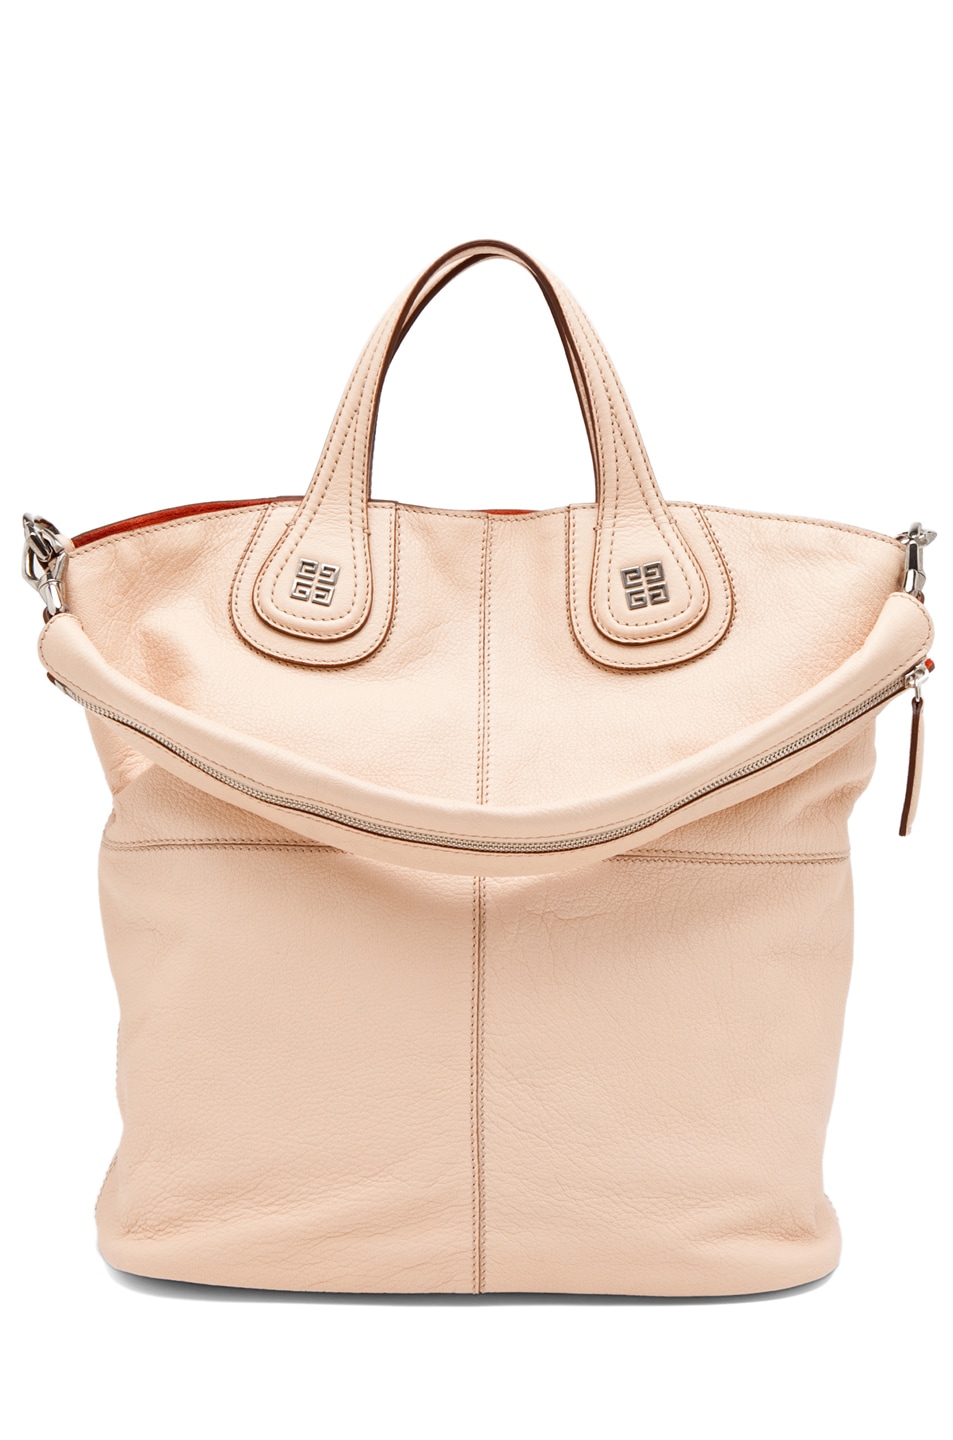 Givenchy Nightingale Shopper in Natural | FWRD